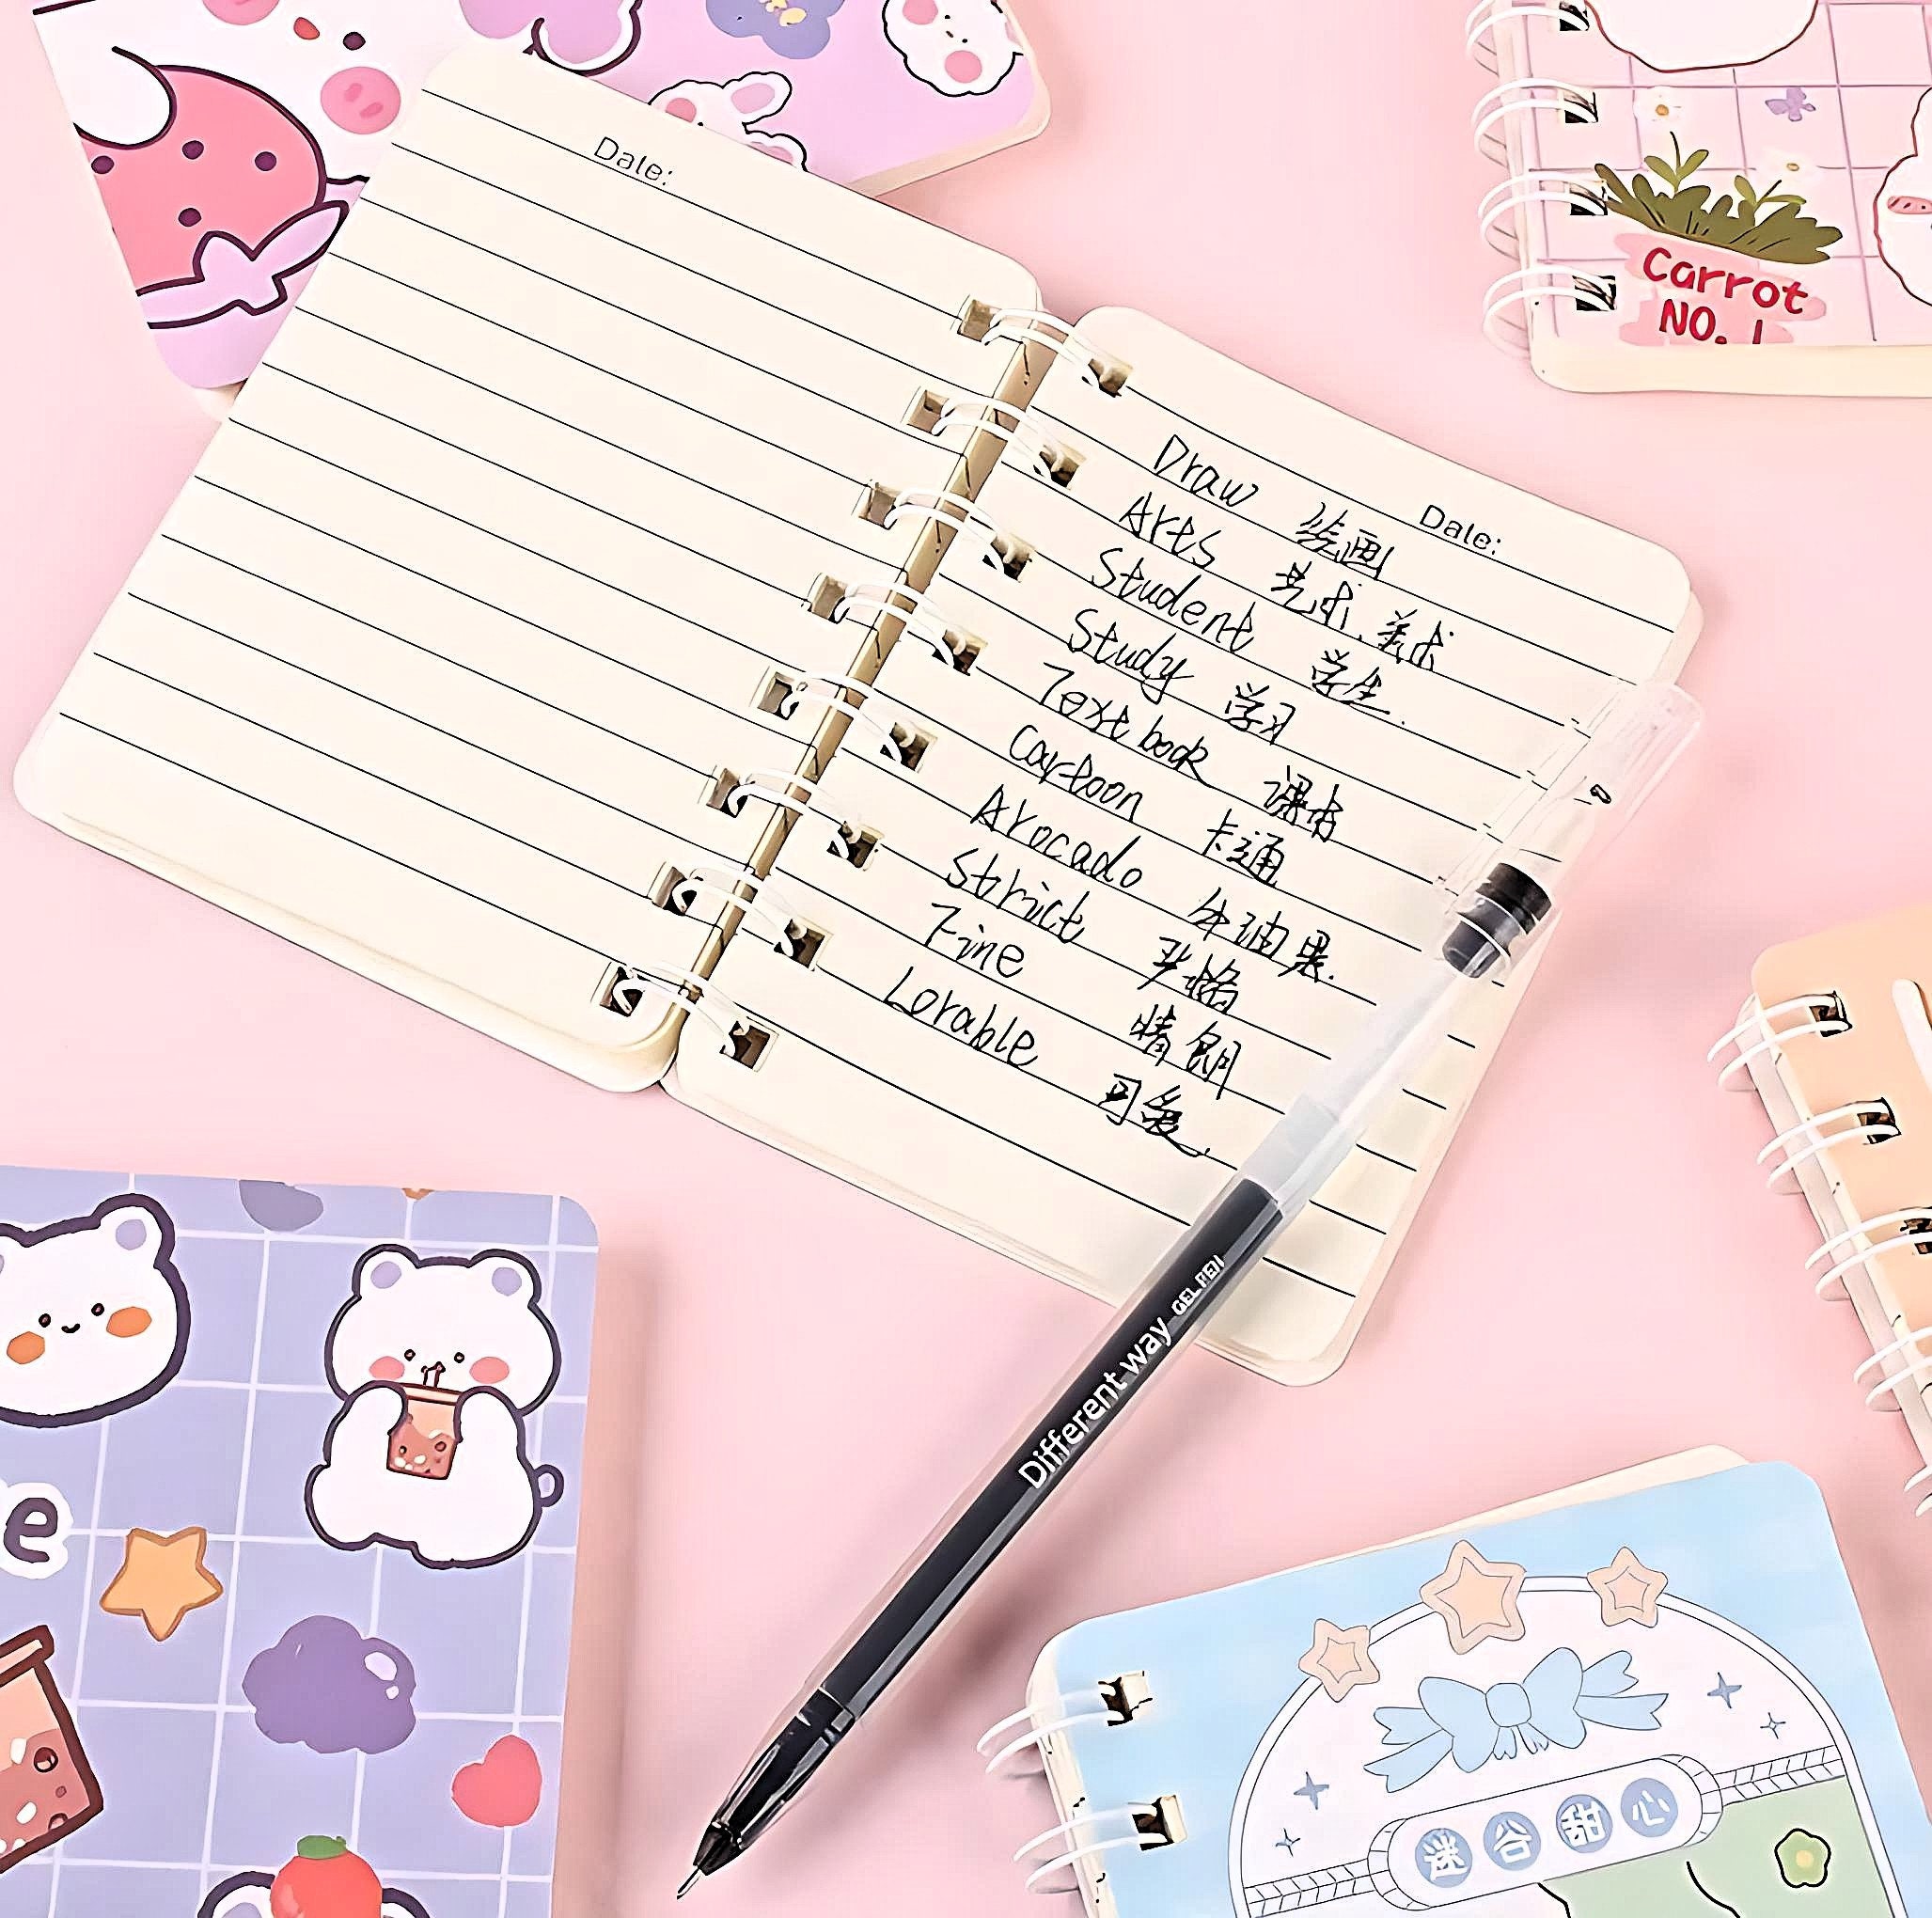 Cute Bear Bunny Cat Kawaii Notebook Stationery Gift Kitty Cat Stationary  Lined Ruled Paper Notebook Small Book Gift Journal Mini Spiral 